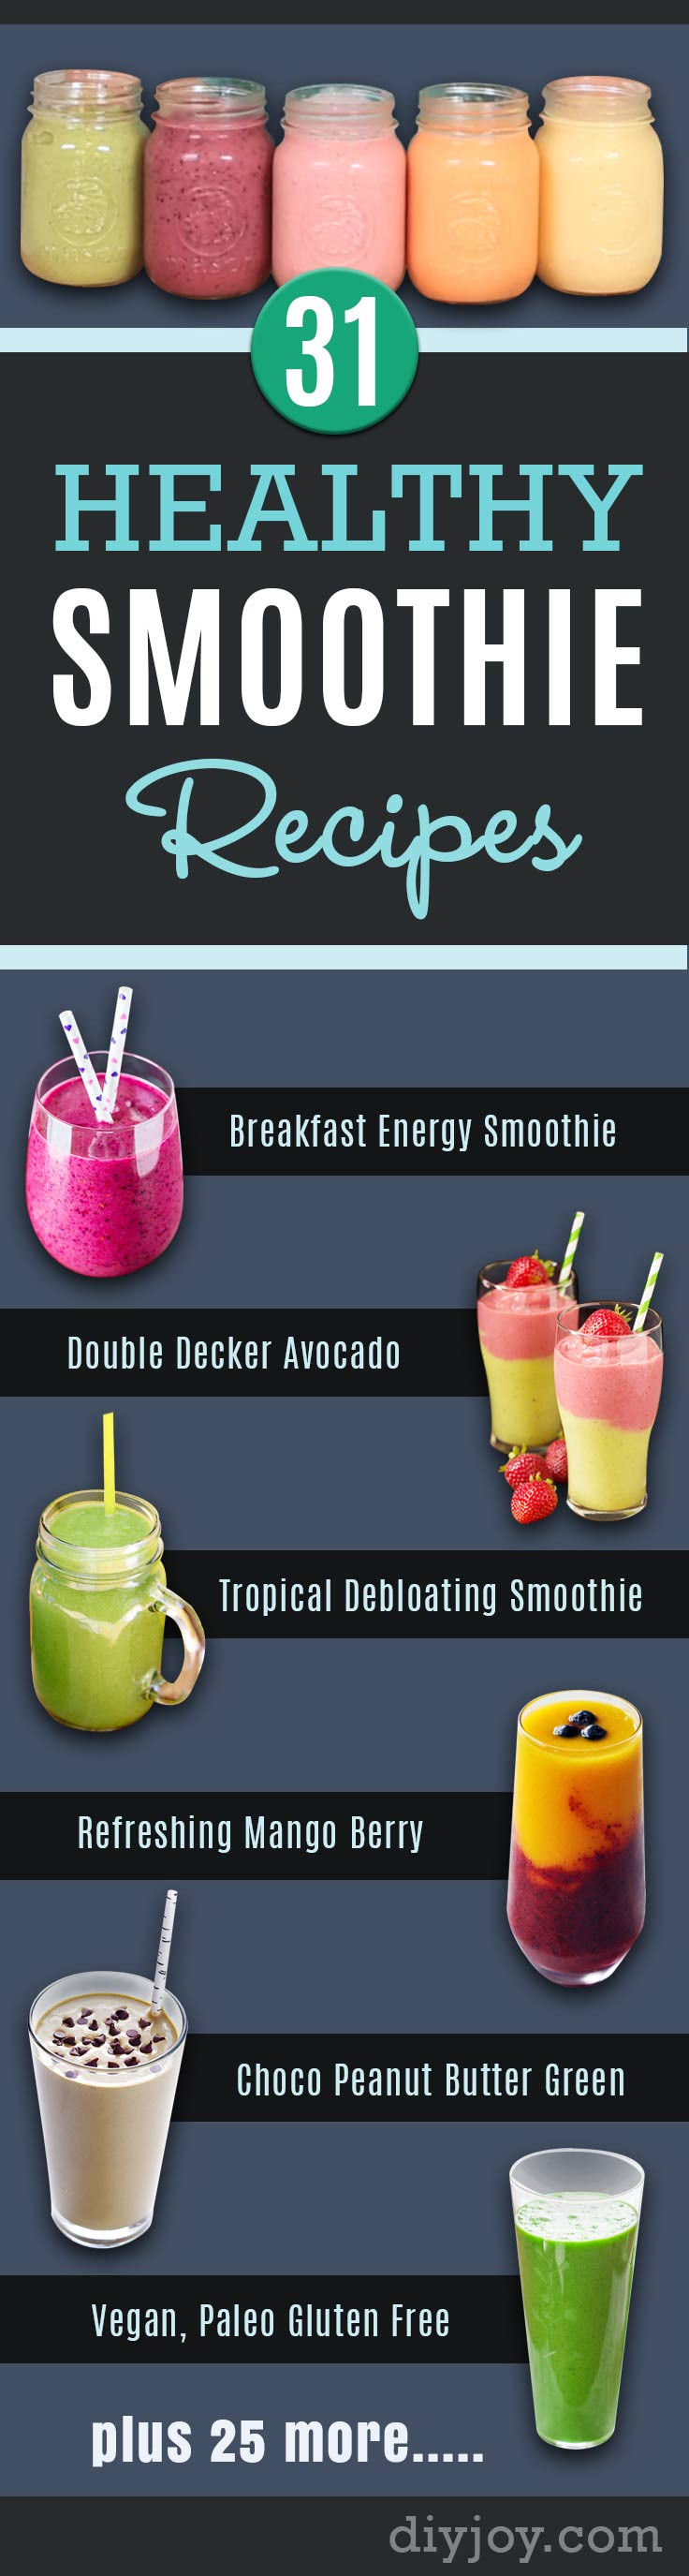 Healthy Smoothies for Dinner the Best Ideas for 31 Healthy Smoothie Recipes